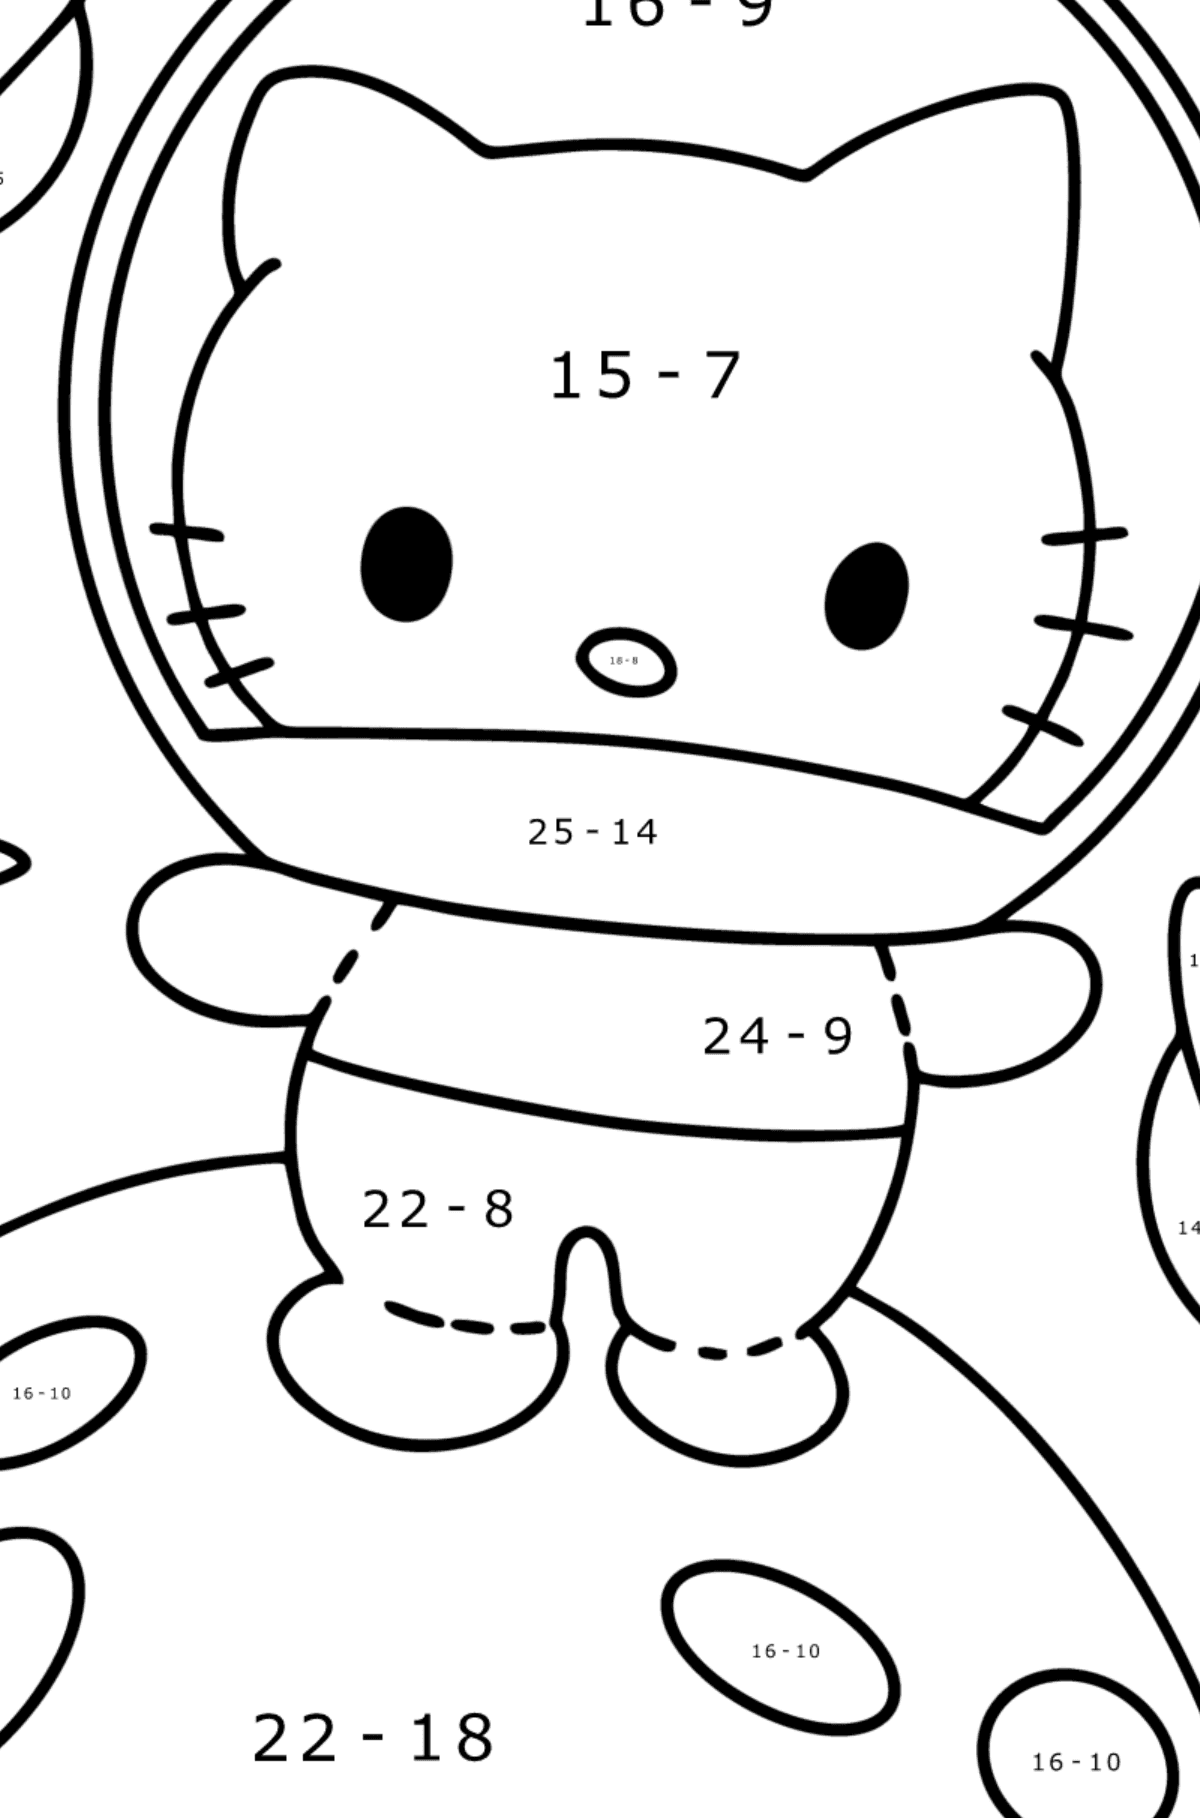 Hello Kitty Astronaut coloring page - Math Coloring - Subtraction for Kids